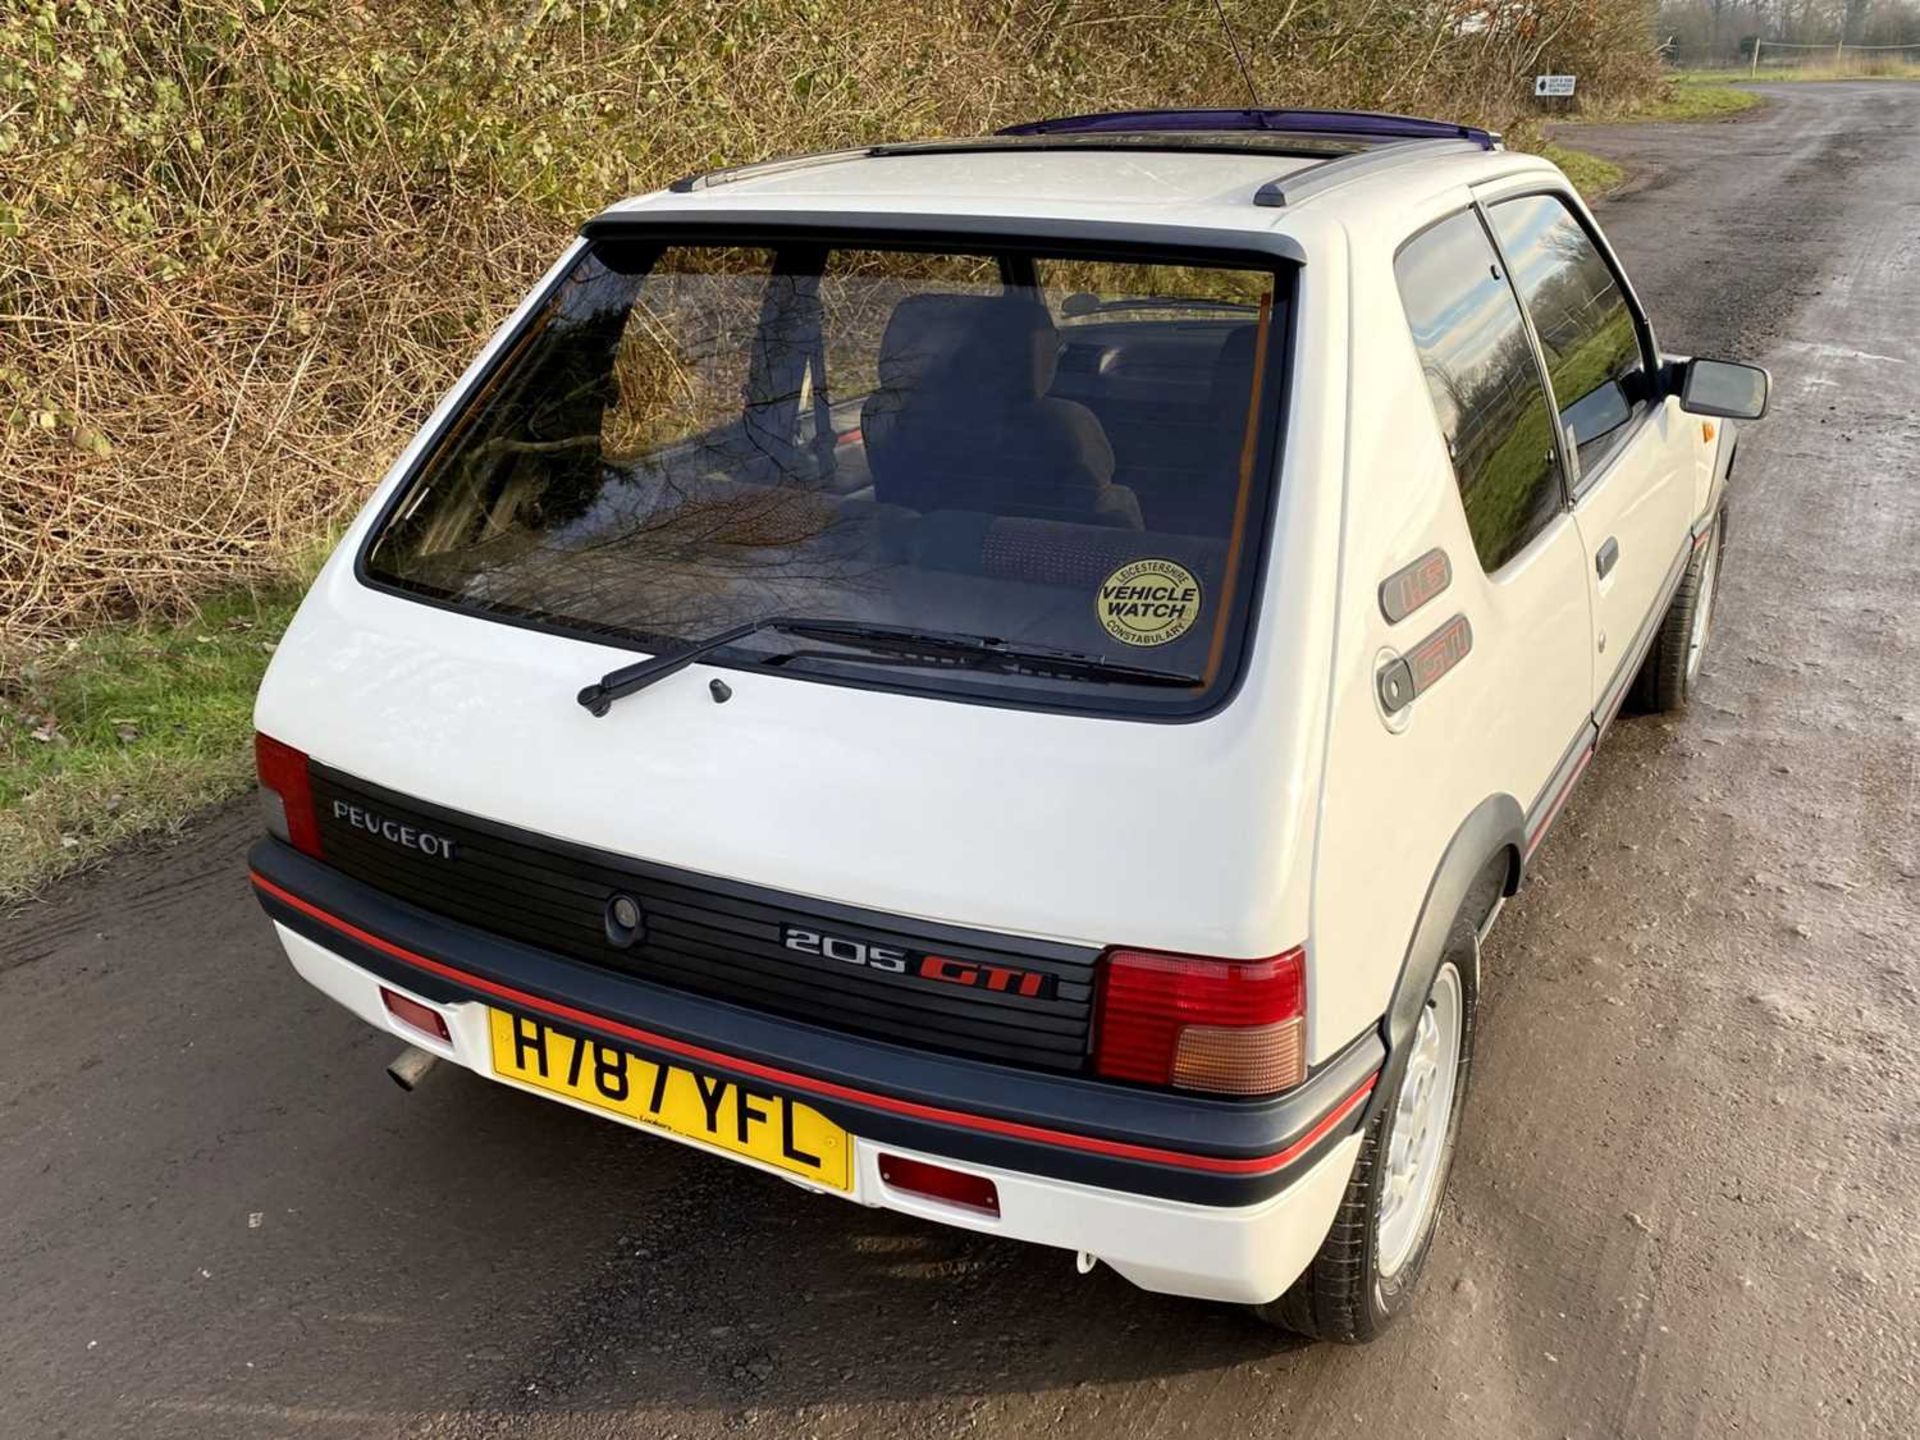 1990 Peugeot 205 GTi 1.6 Only 56,000 miles, same owner for 16 years - Image 25 of 81